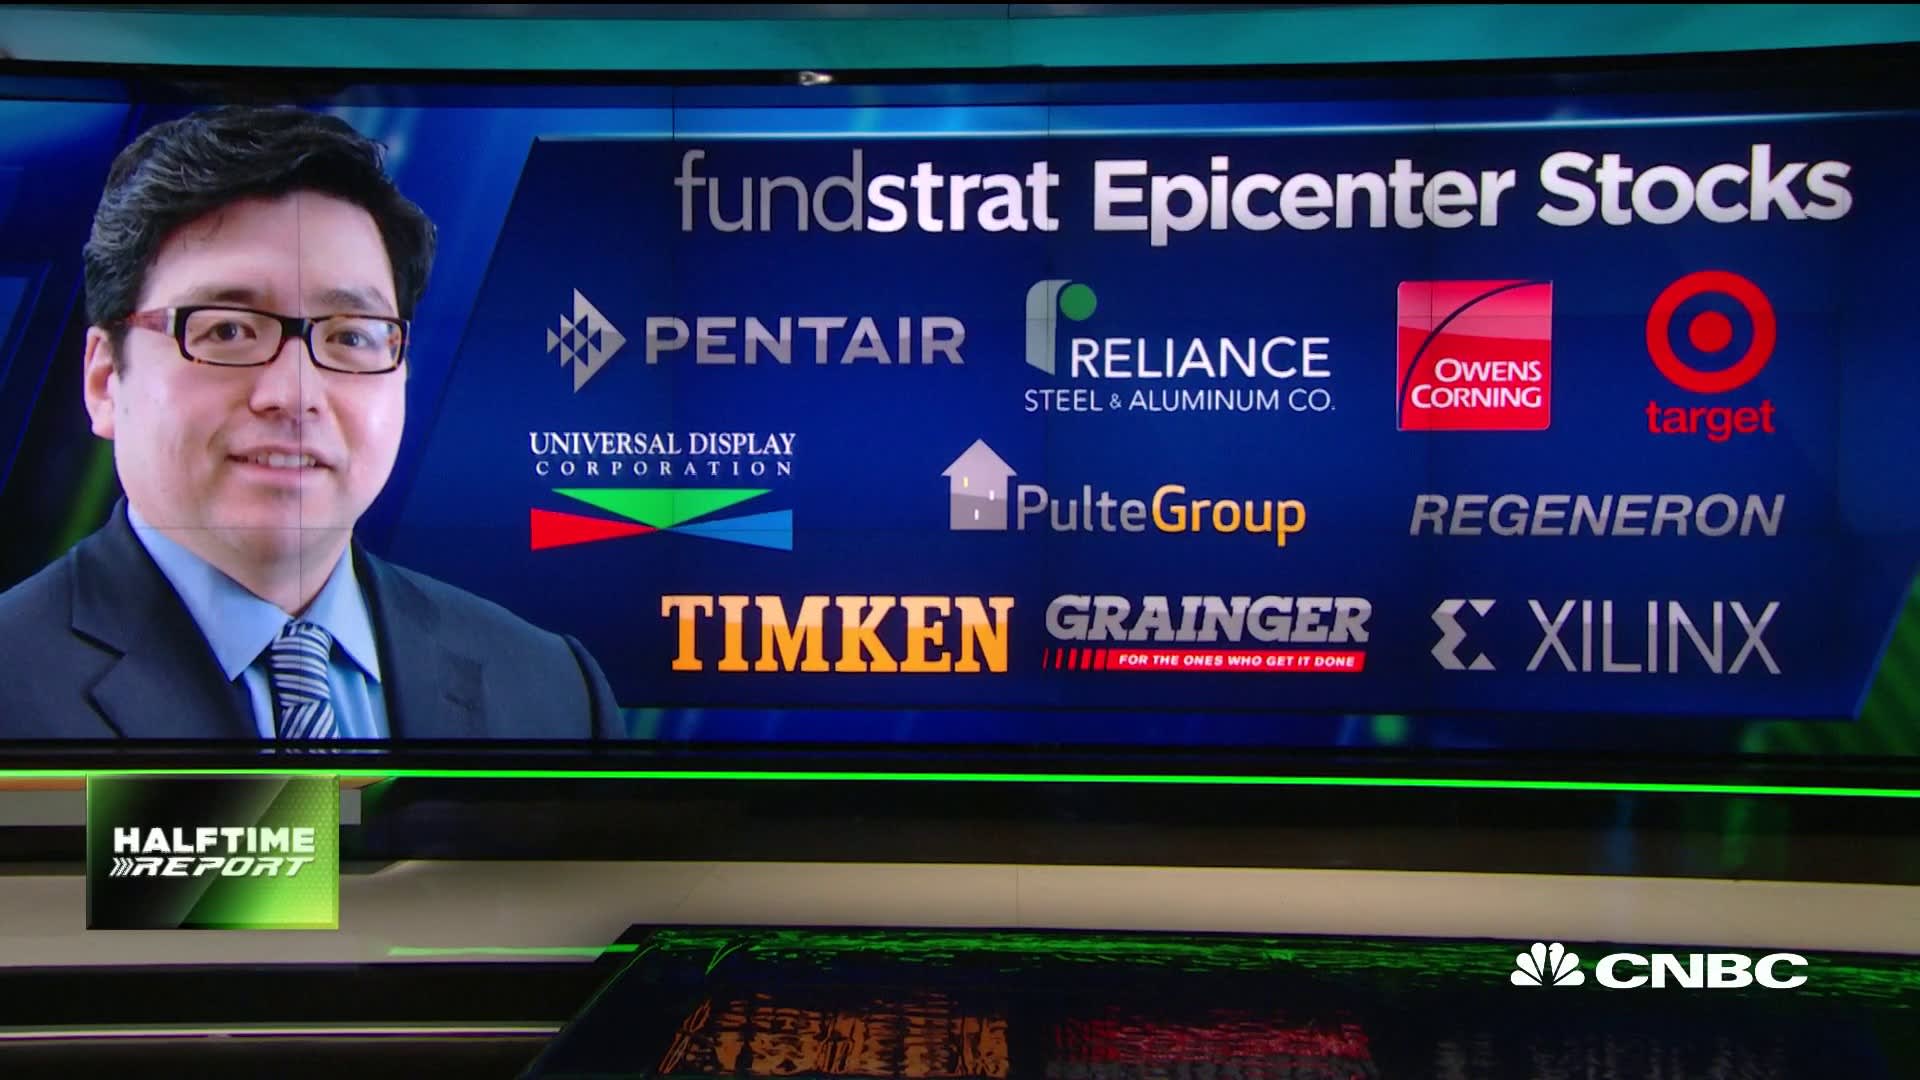 Upside in the market will come from epicenter stocks, says ...